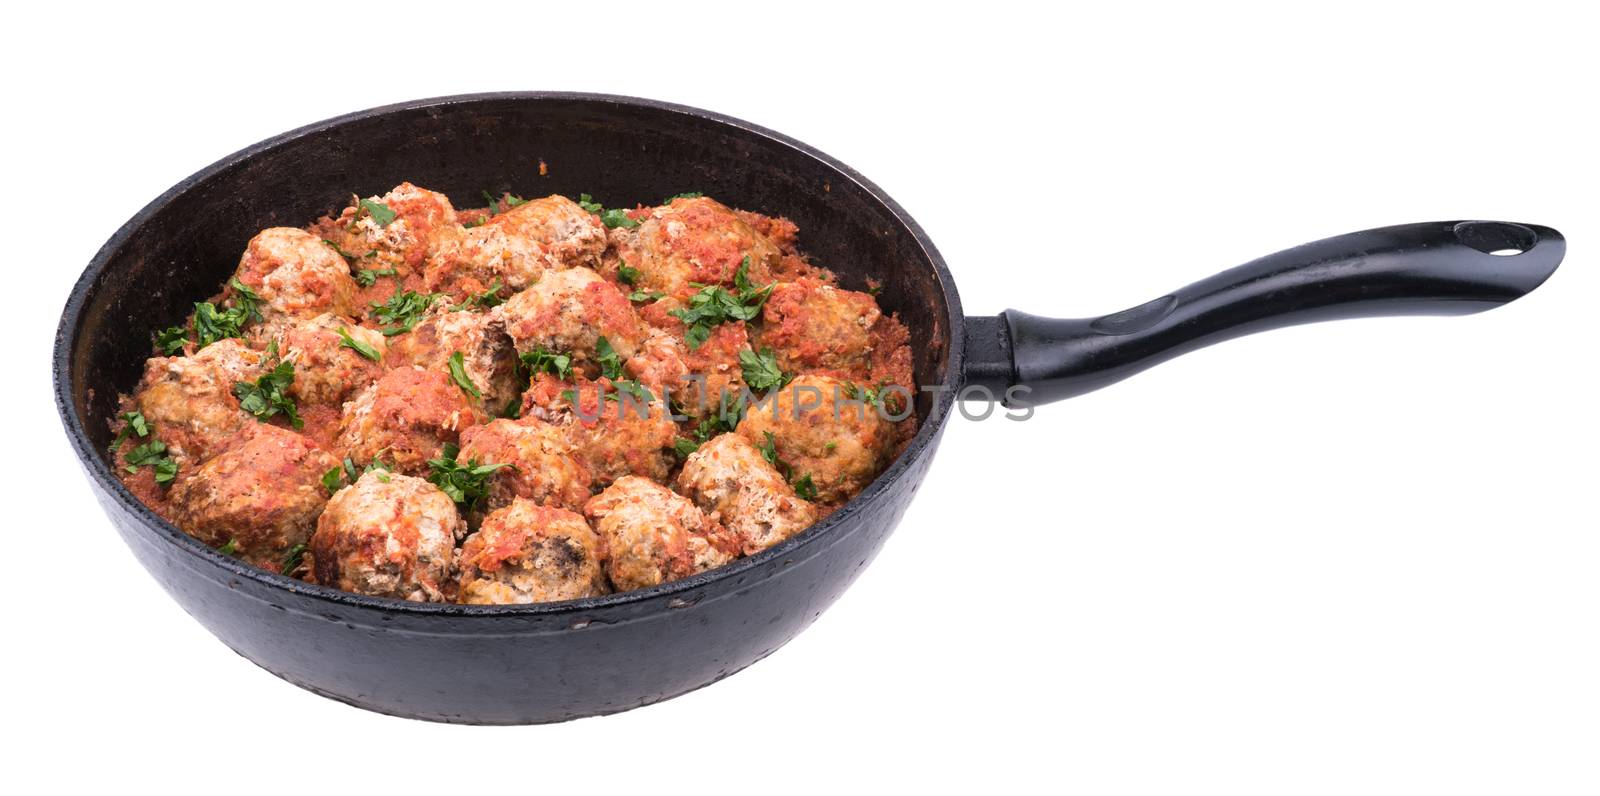 Stewed meatballs in a pan isolated on white background. by DGolbay